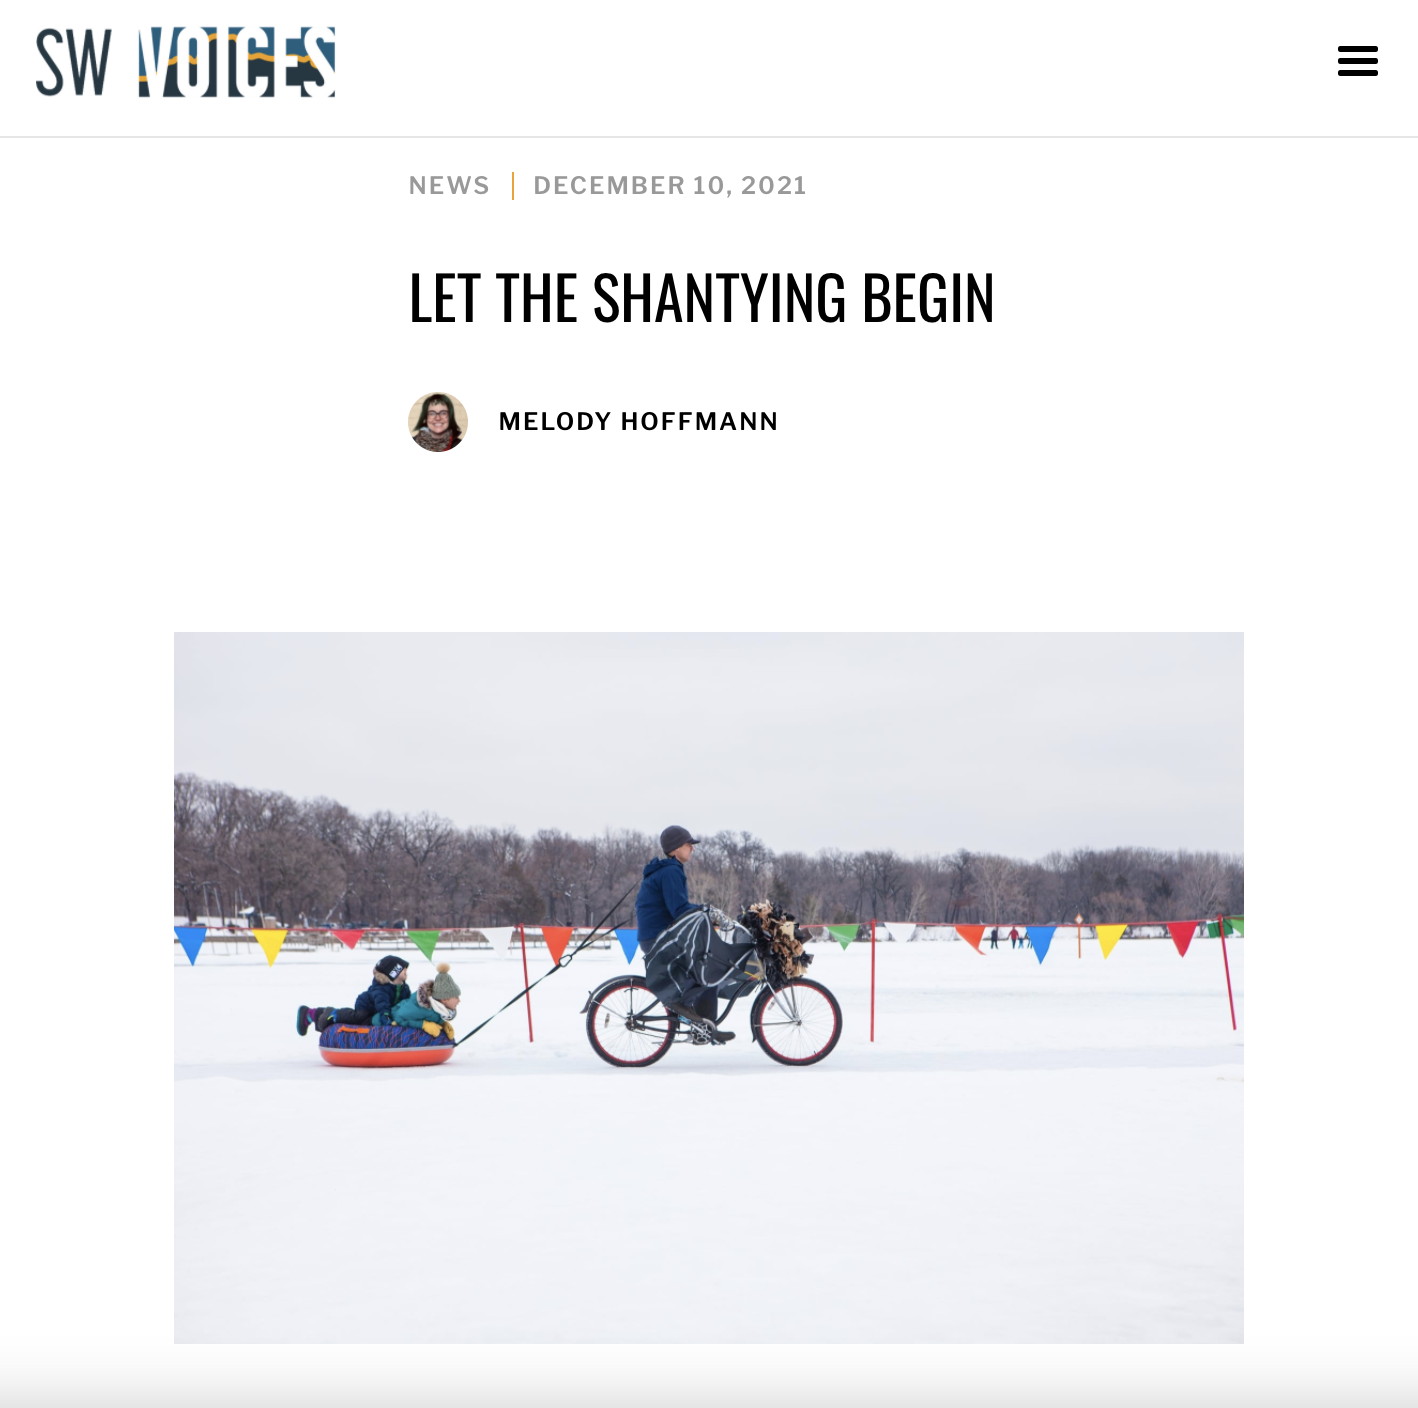 A screenshot of an online article with am image of a bike riding across the frozen lake pulling a sled